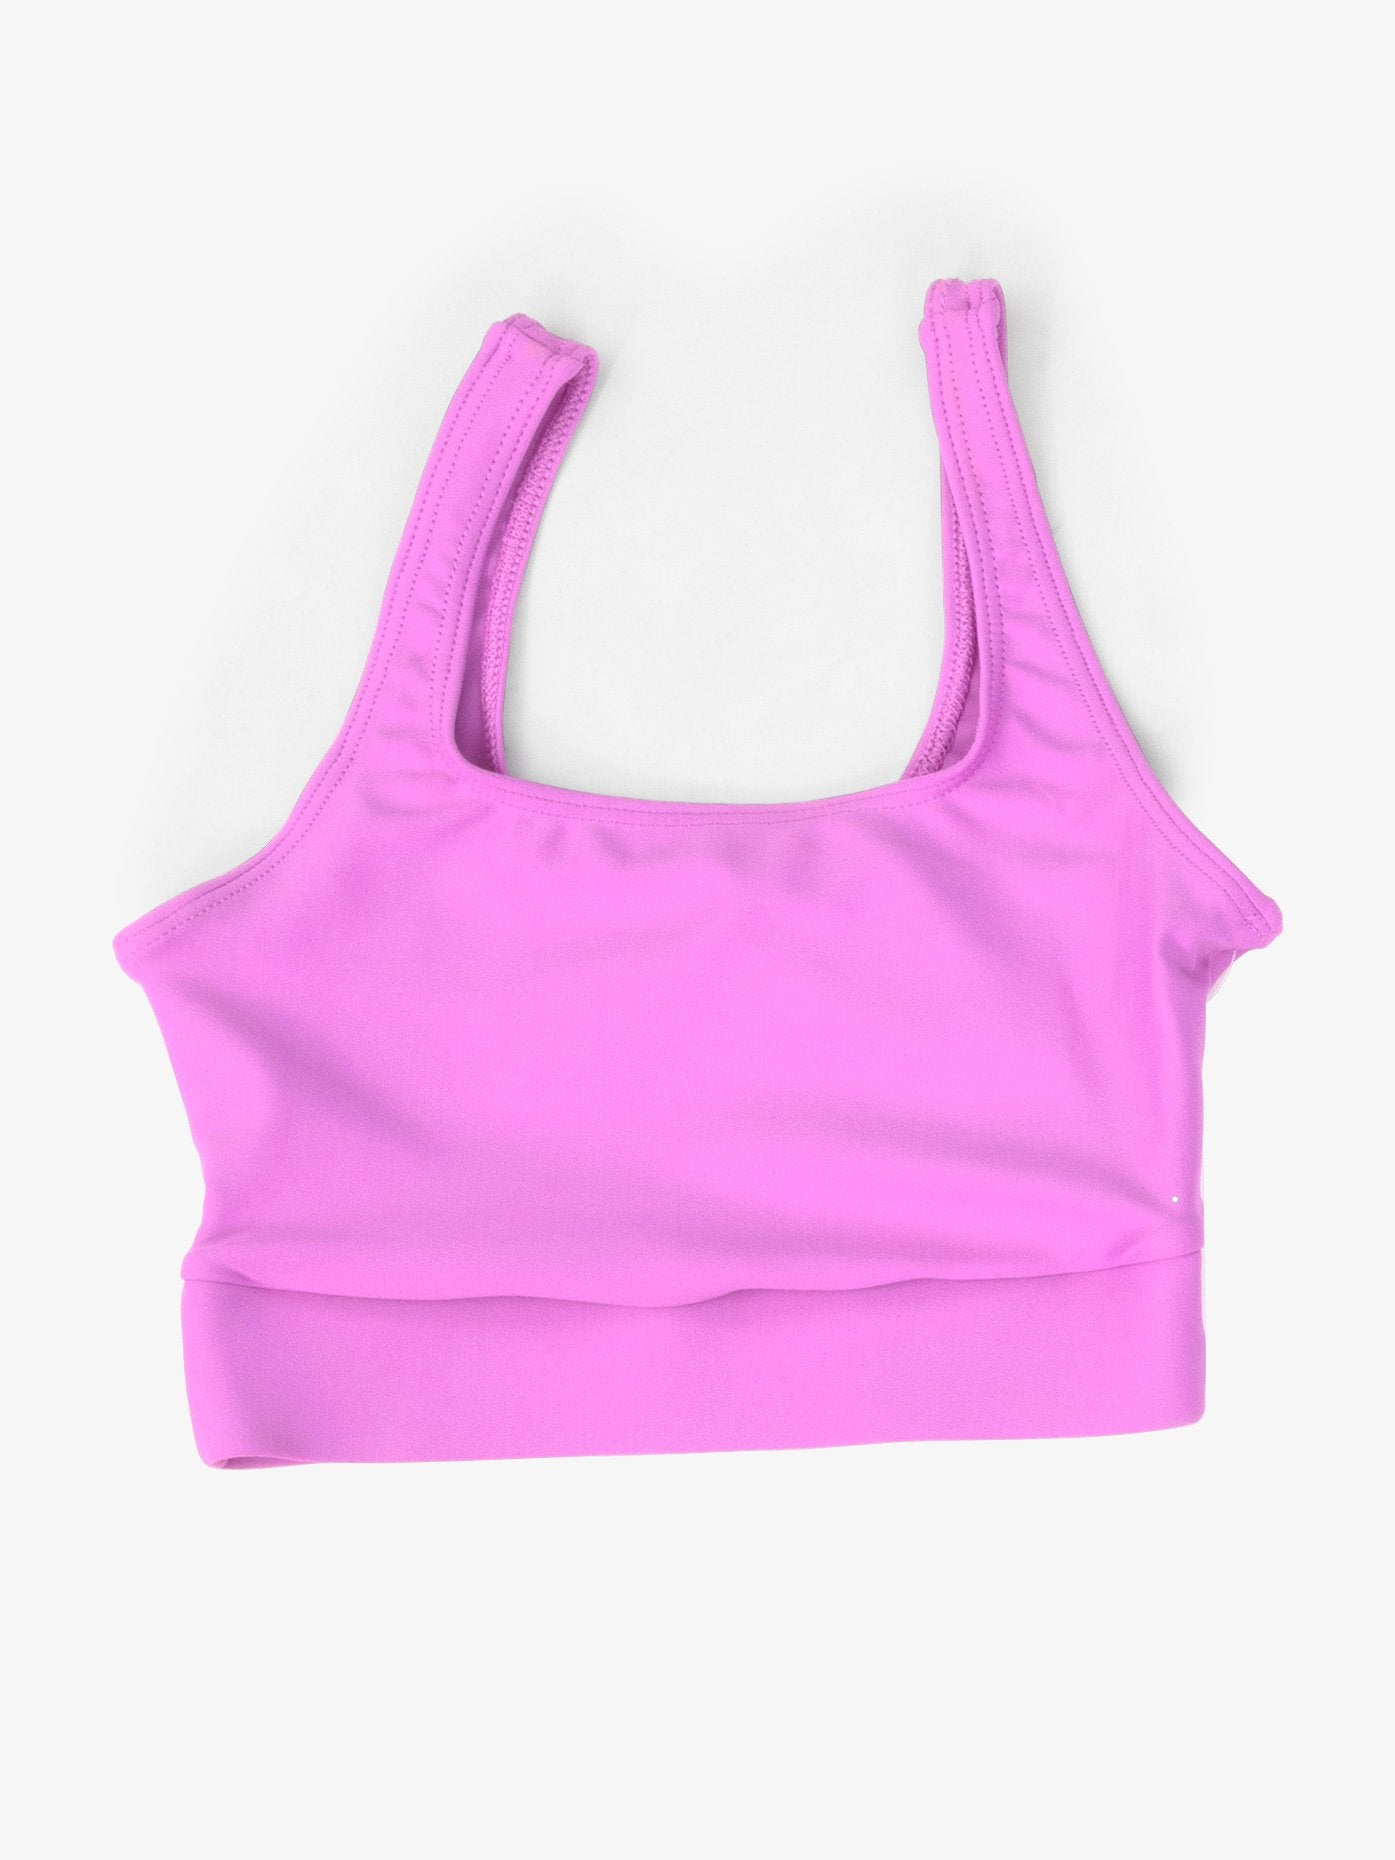 Women’s pinched back pink bra top